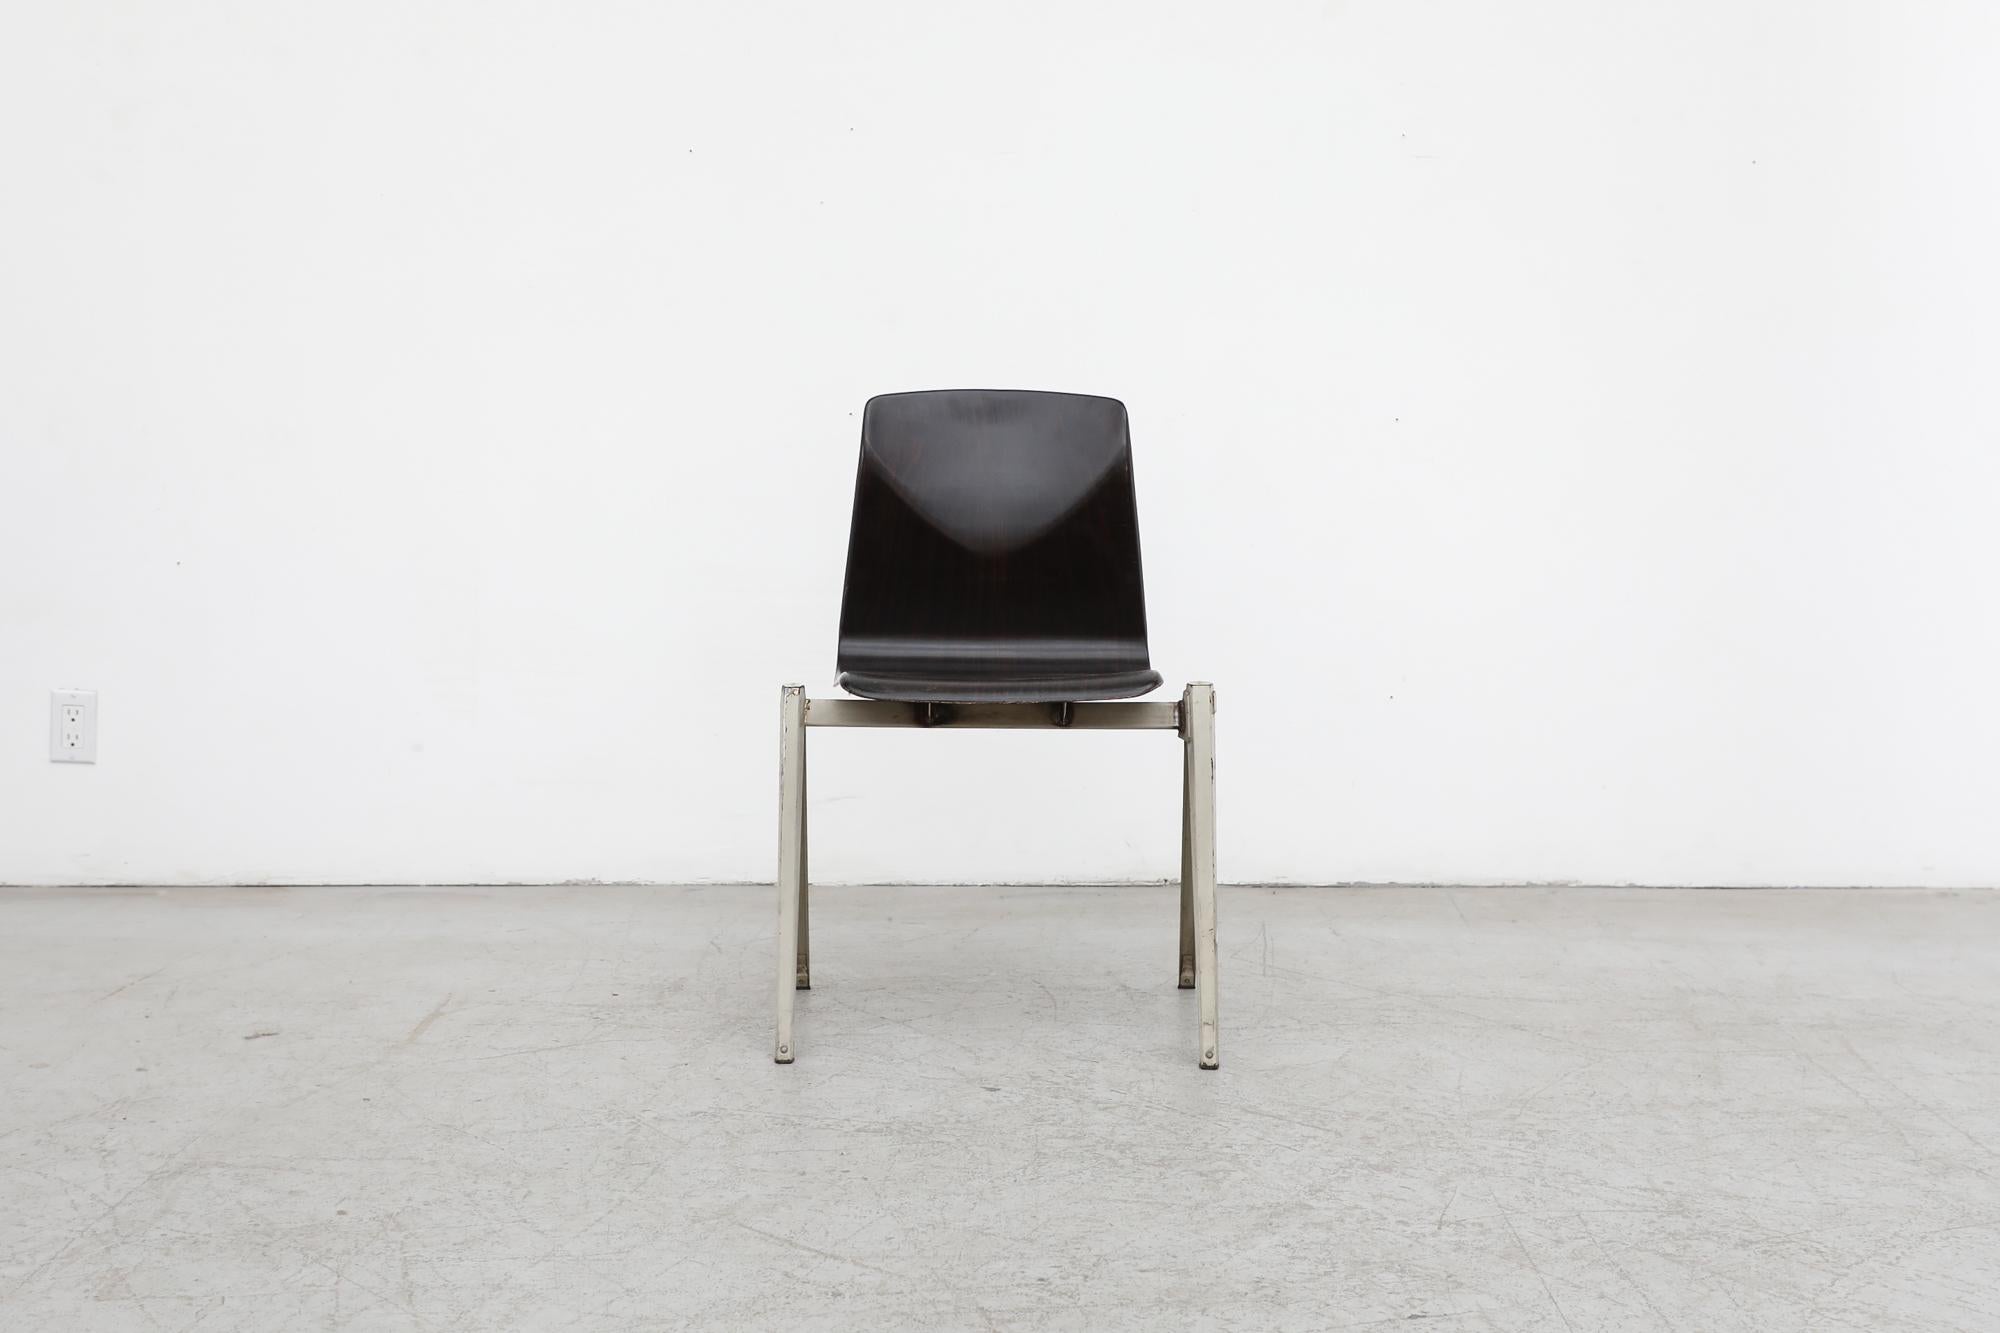 Single Prouve Style Industrial Stacking Chair with dark stained laminate wood shell seat and grey enameled metal frame. In original condition with visible frame wear and scratching consistent with its age and use. Others listed in various colors